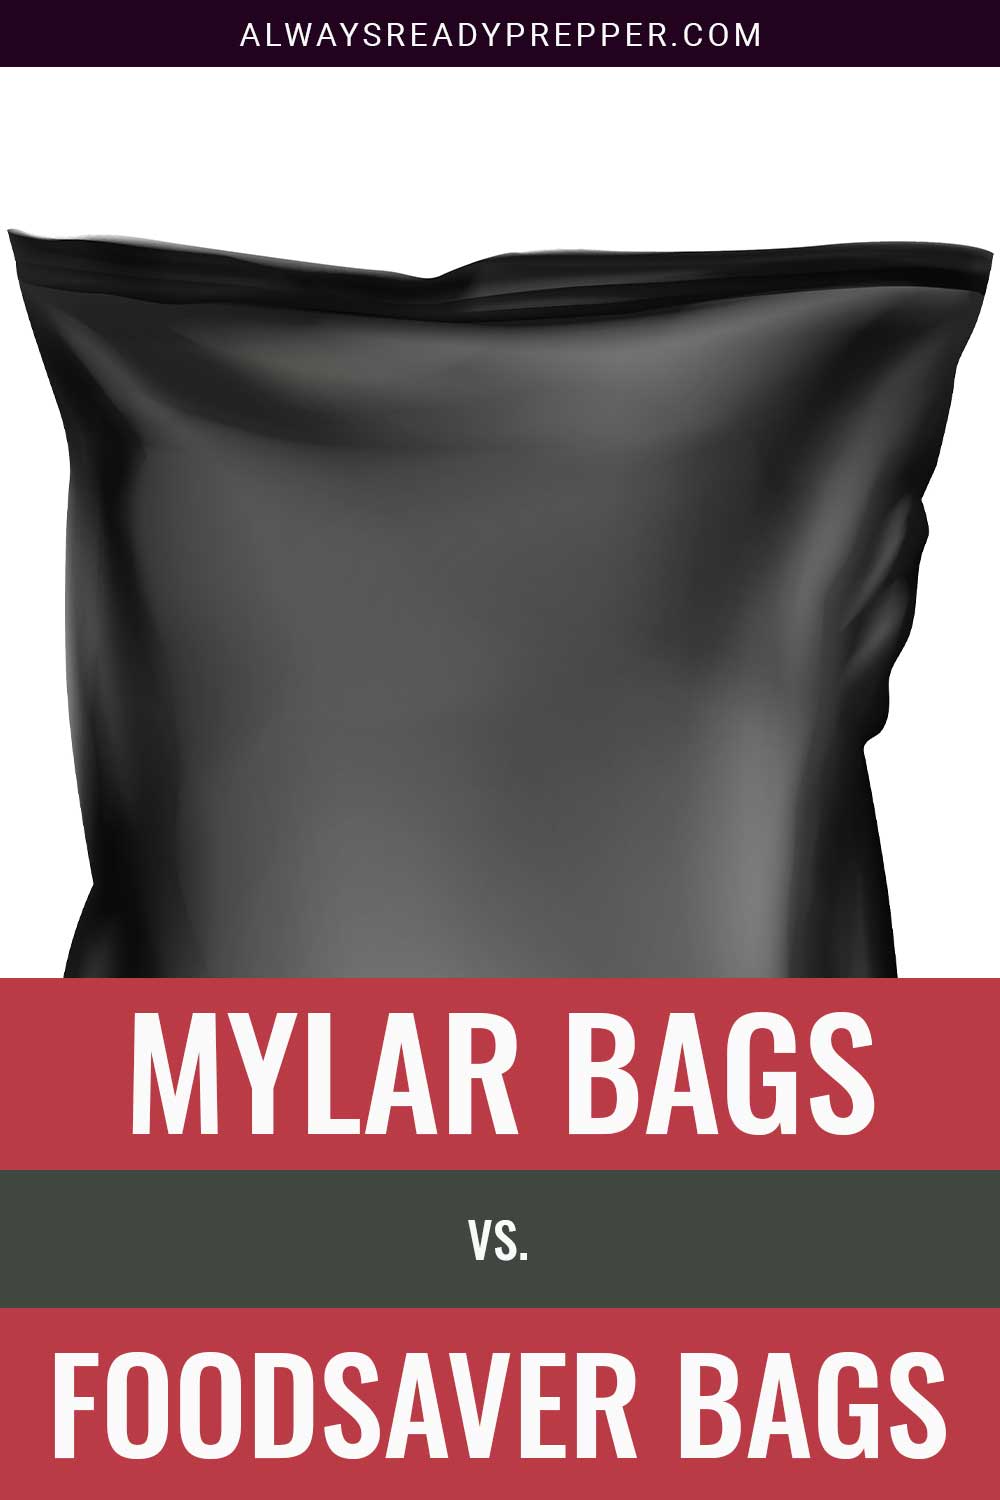 A black food saver bag in front of white background - Mylar Bags vs. Foodsaver Bags.